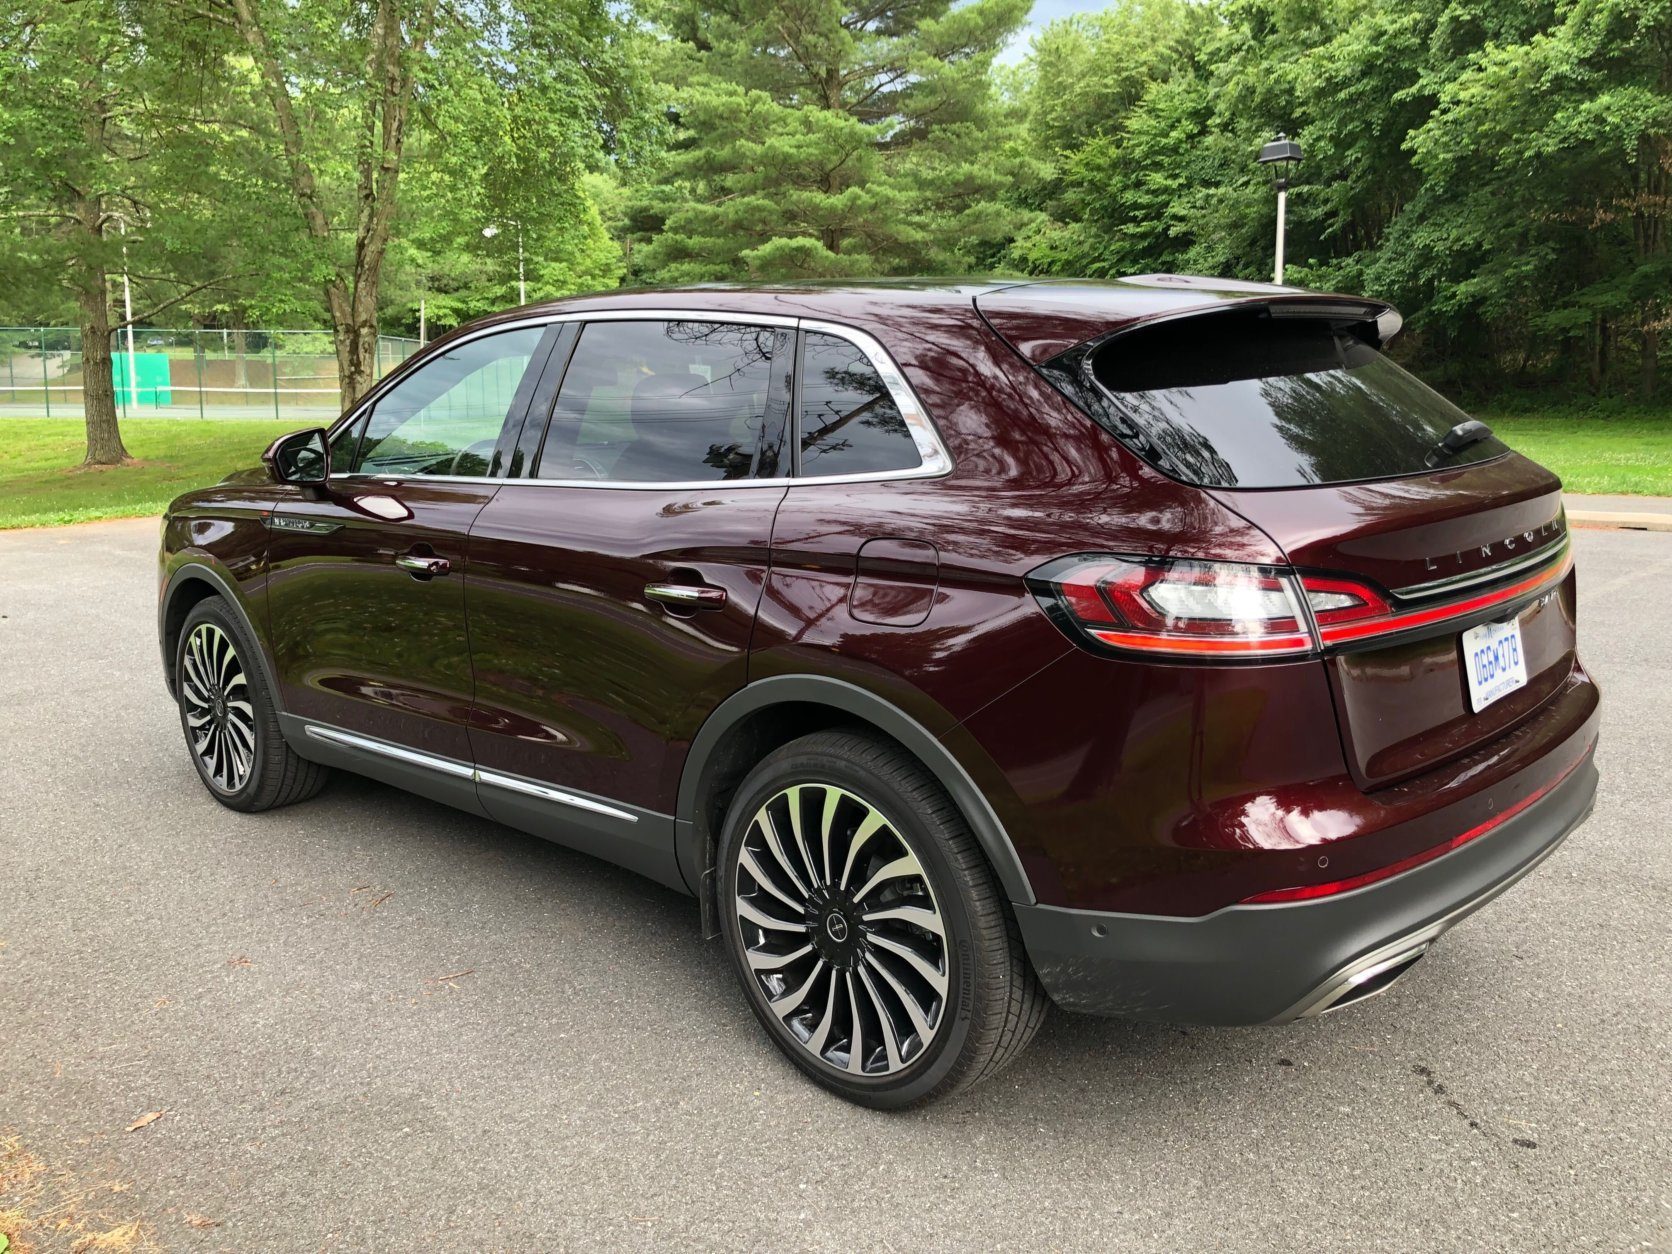 car review lincoln s nautilus black label a luxurious parade of burgundy at a price wtop nautilus black label a luxurious parade